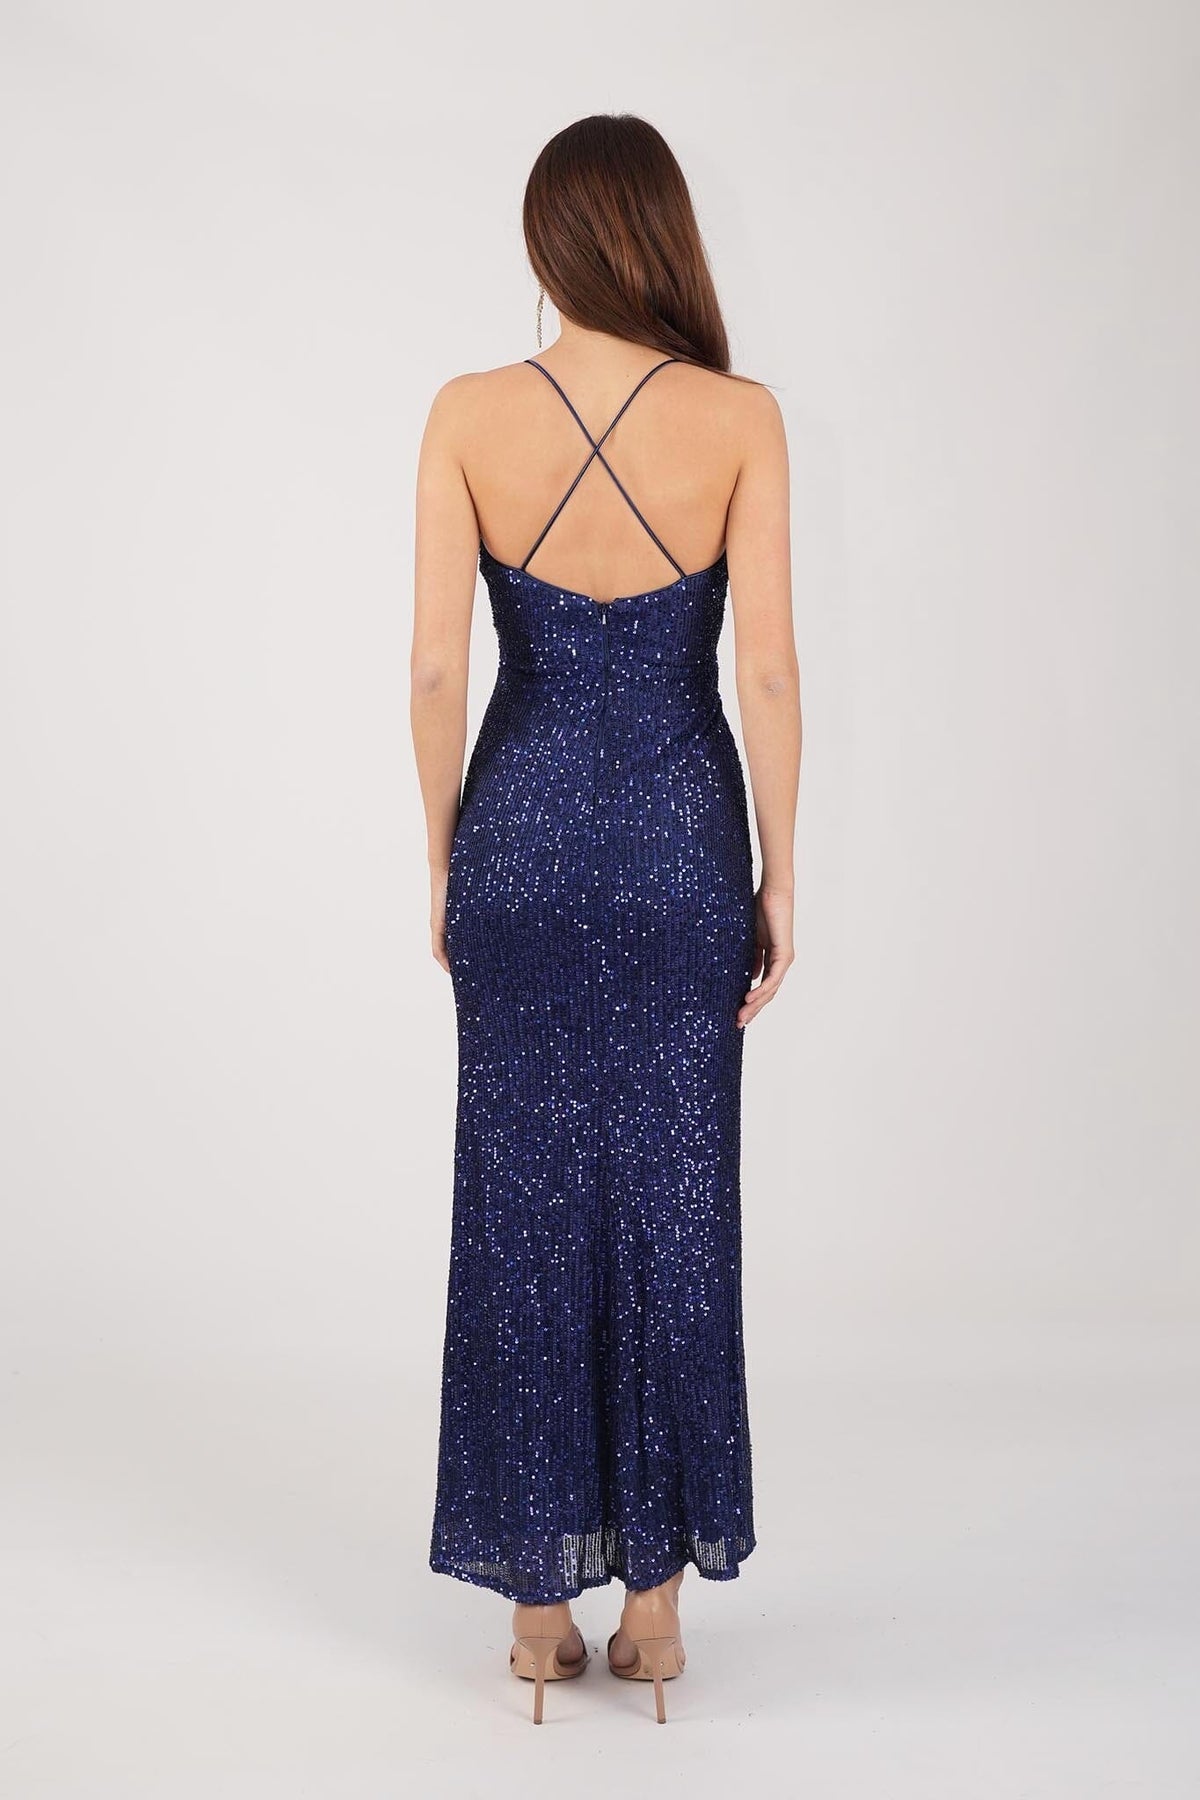 Crisscross Straps on Open Back of Deep Blue Fitted Sequin Maxi Dress with V Neckline and Side Slit 